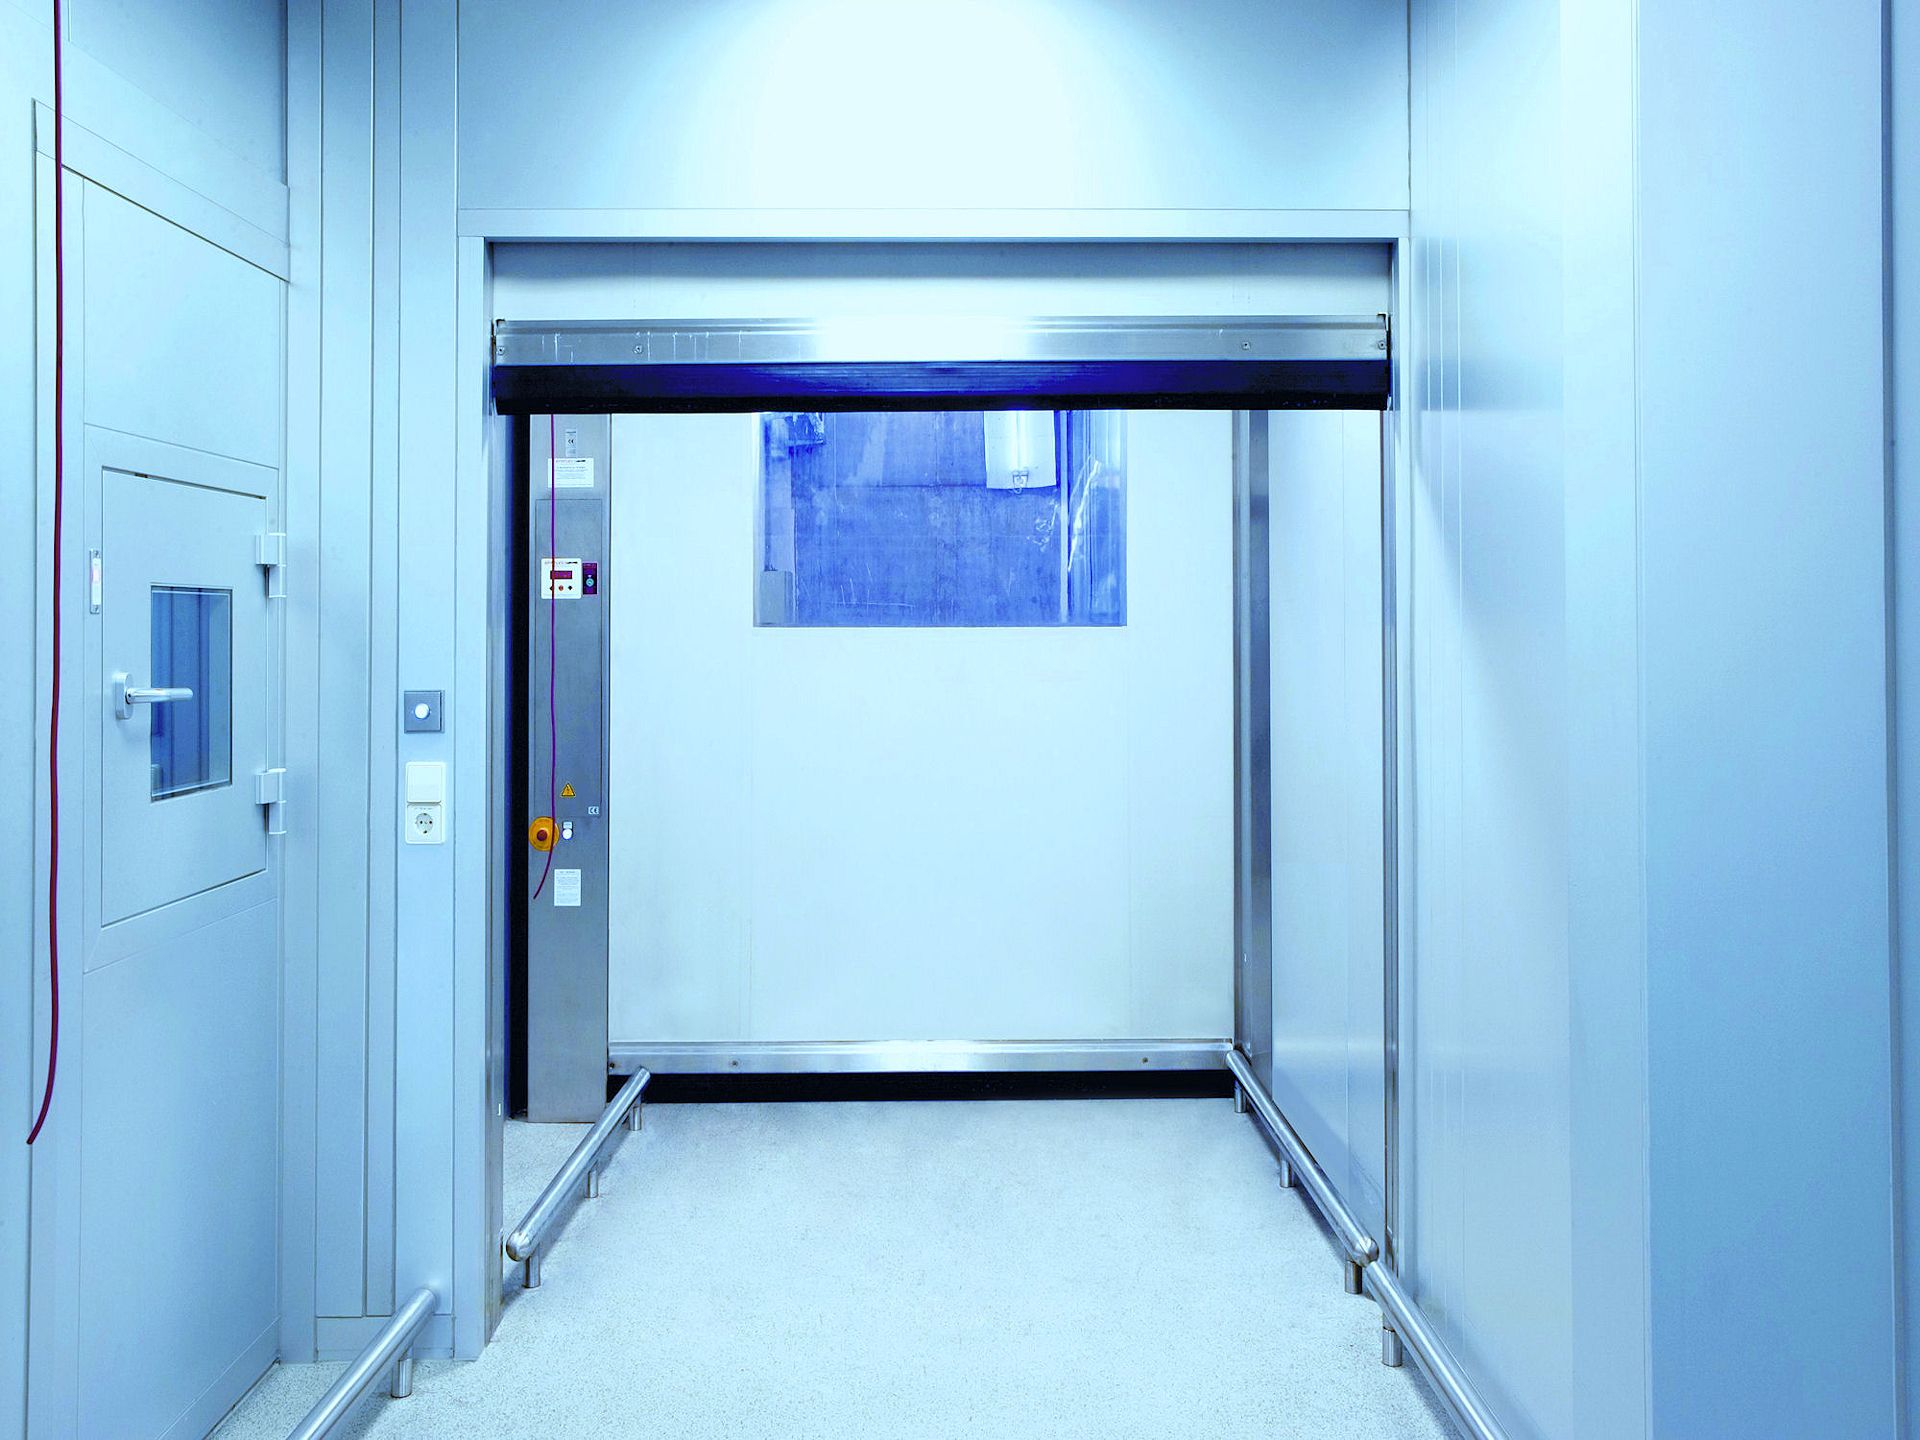 Efaflex Door and Safety Systems